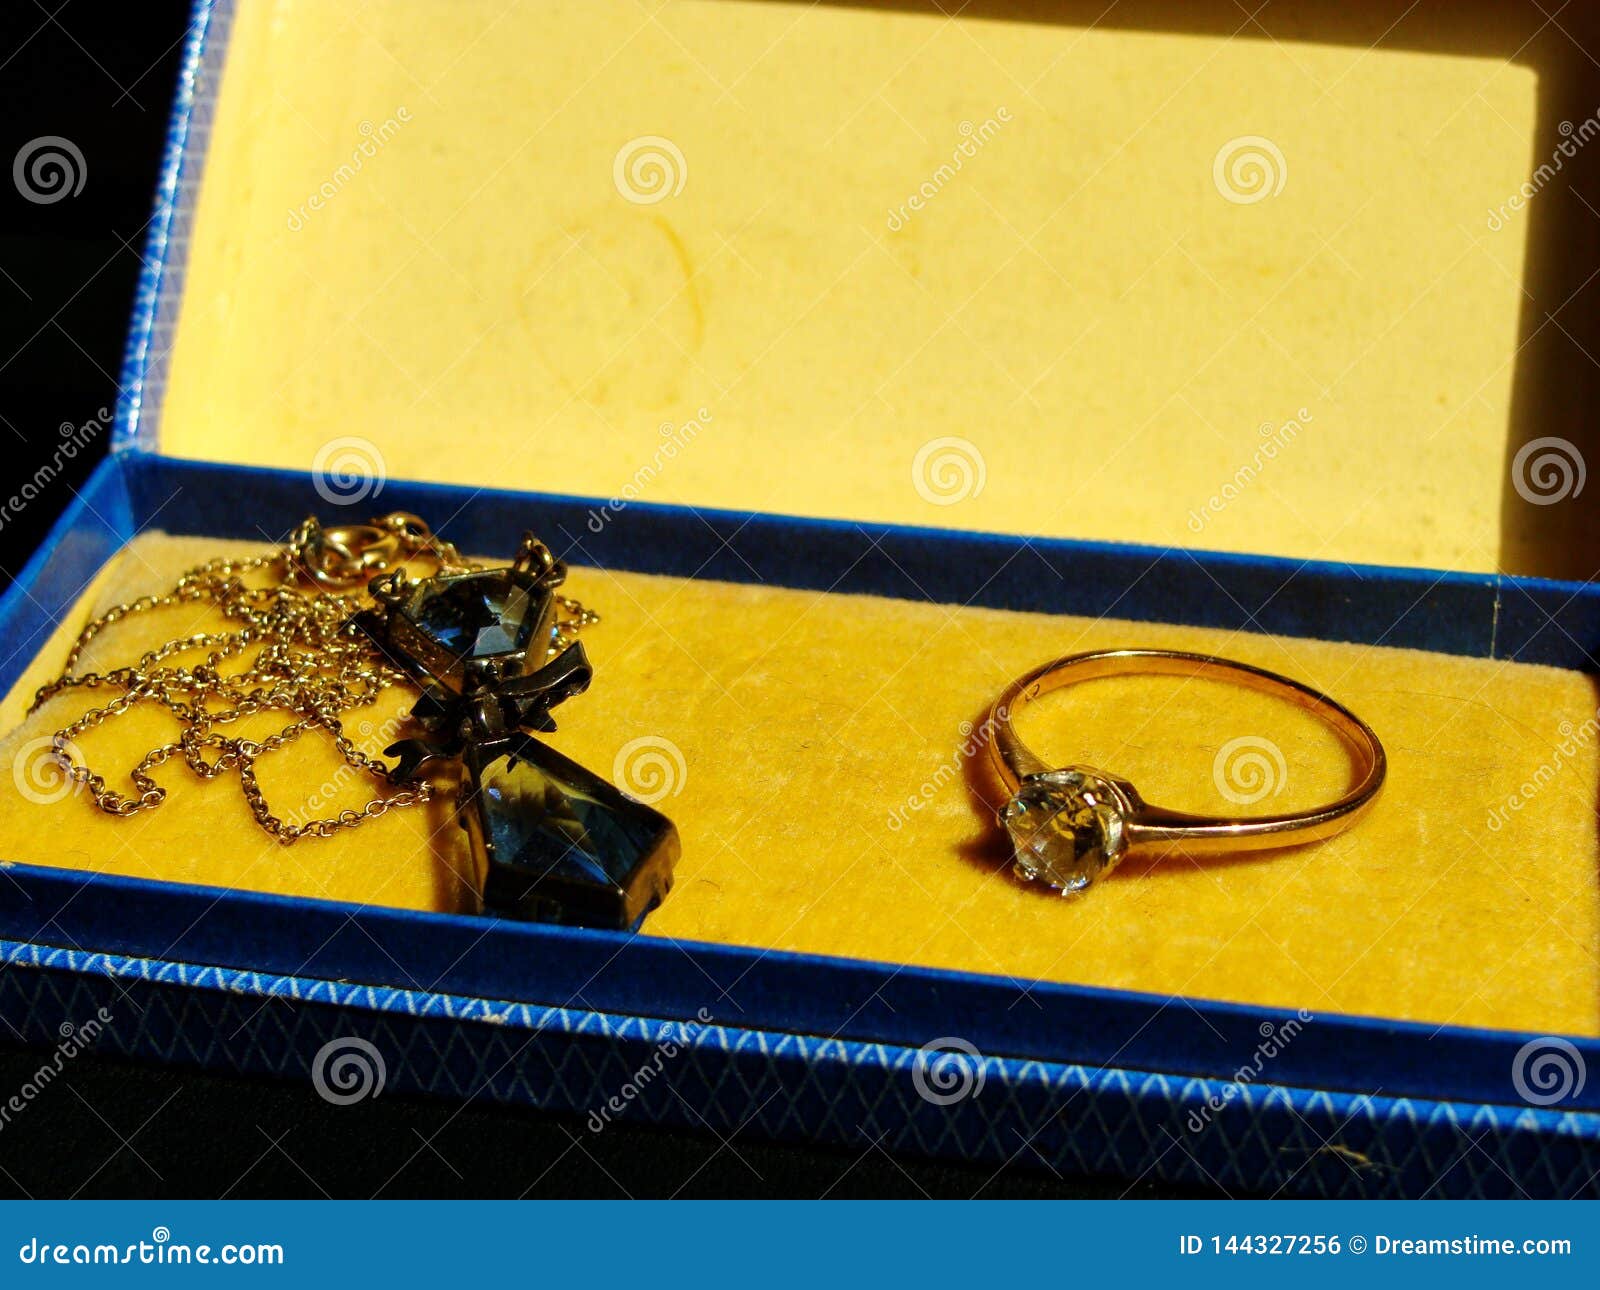 Vintage Neckless And Ring In Jewelry Box. Shadow Over Neckless ...